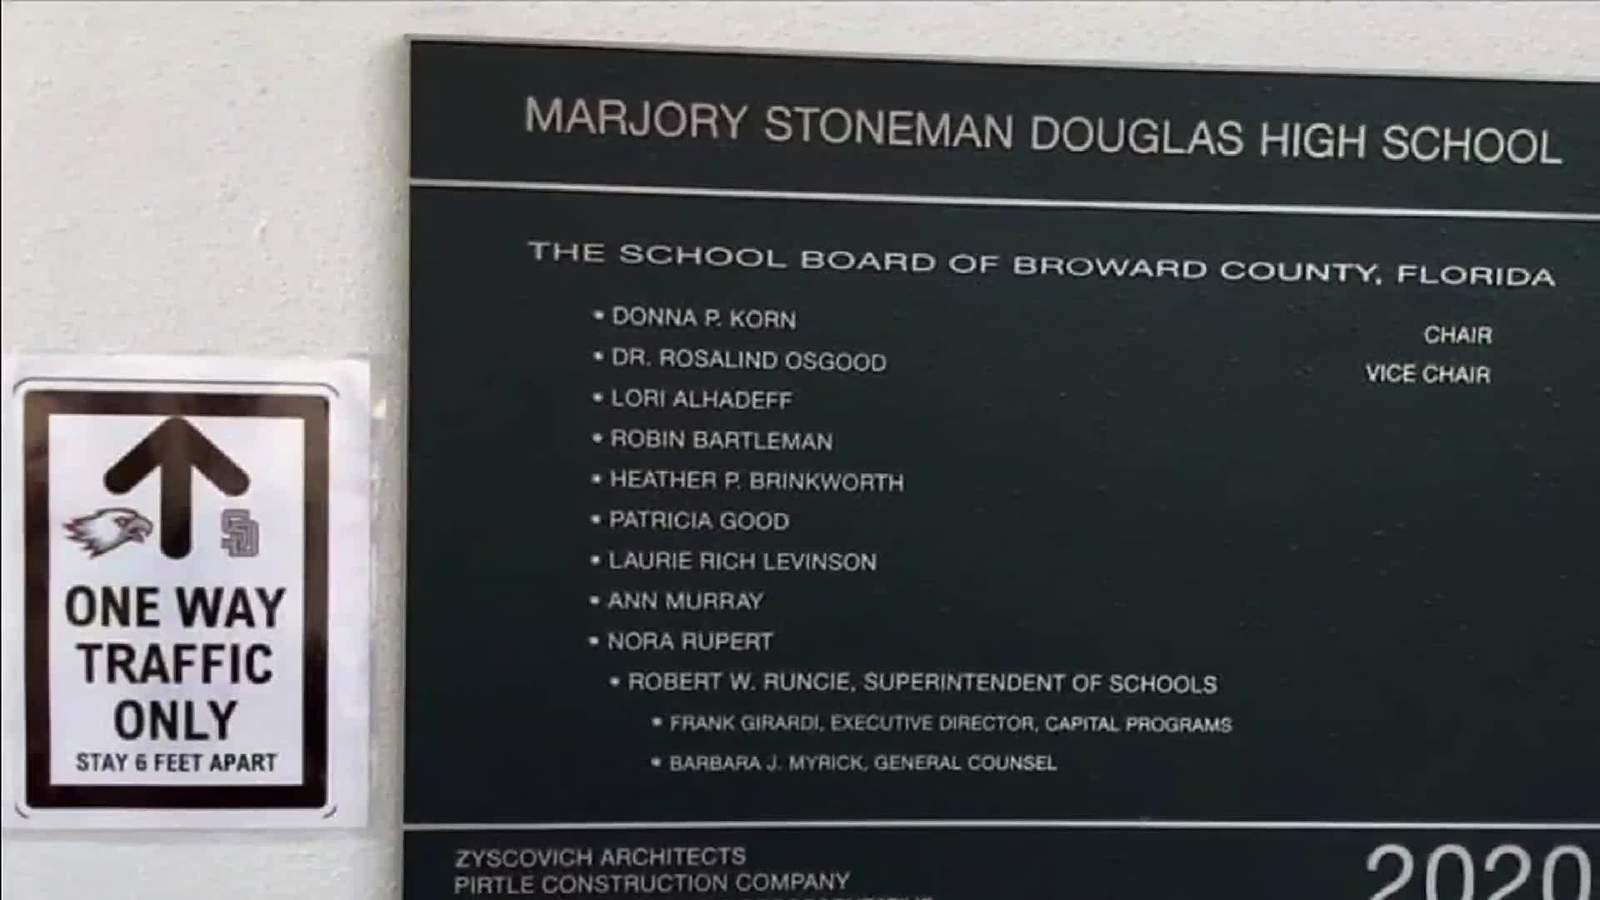 'Move forward’ is purpose of new building says head of Broward schools when asked why no plaque for MSD victims